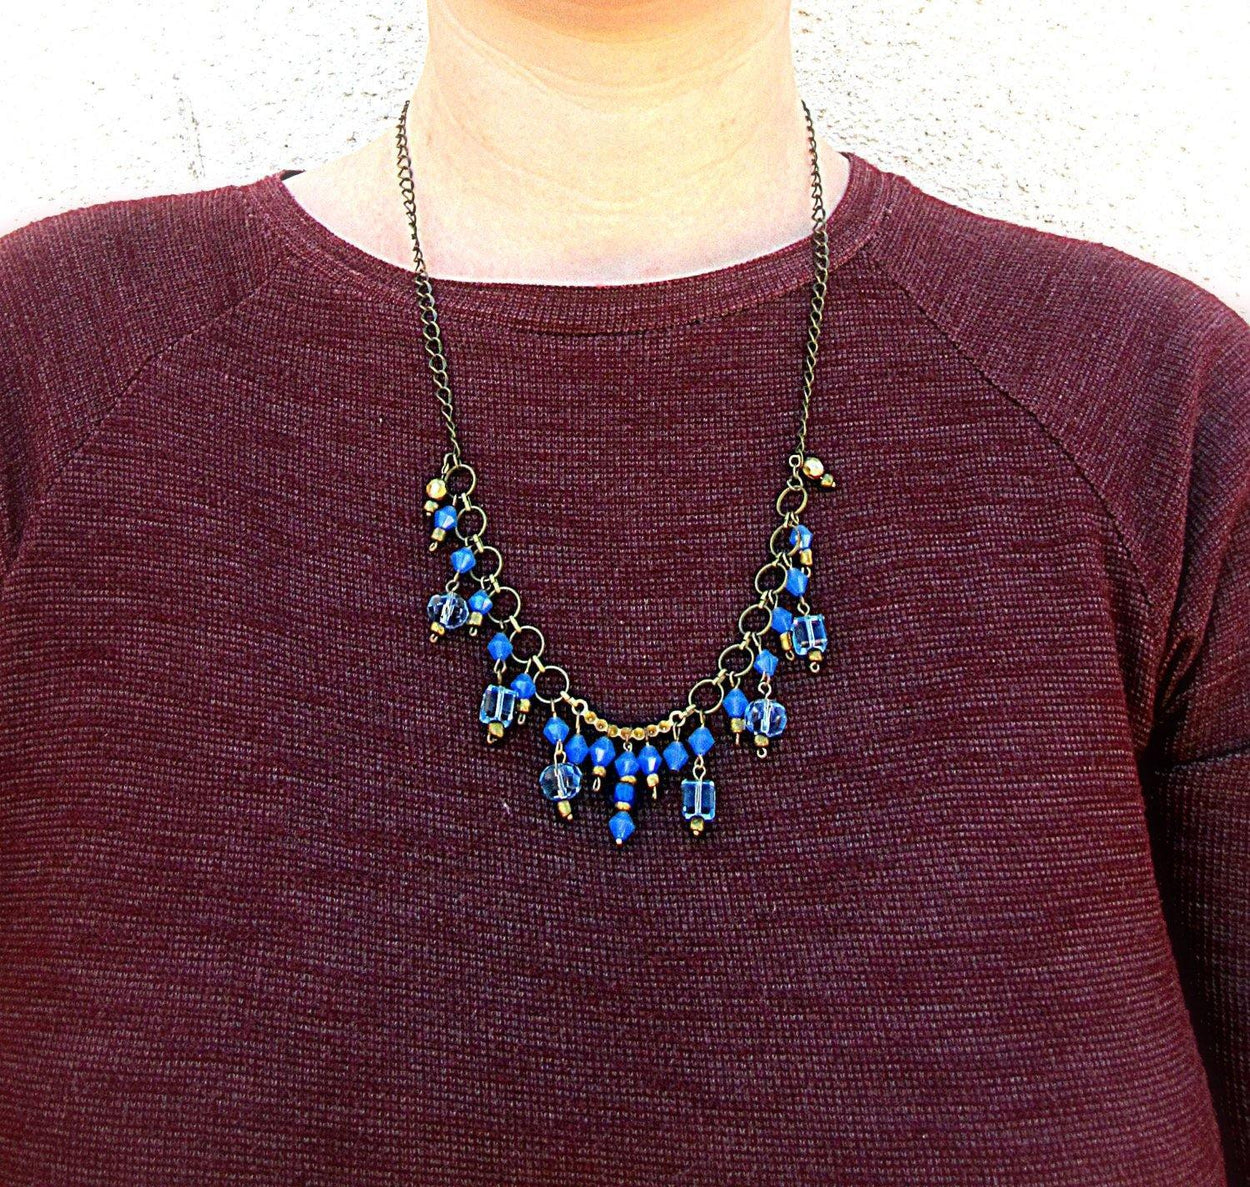 Necklace made of light and dark blue glass beads and gold small  beads on a chain of yellow metal - GLEZANT designer goods store. 